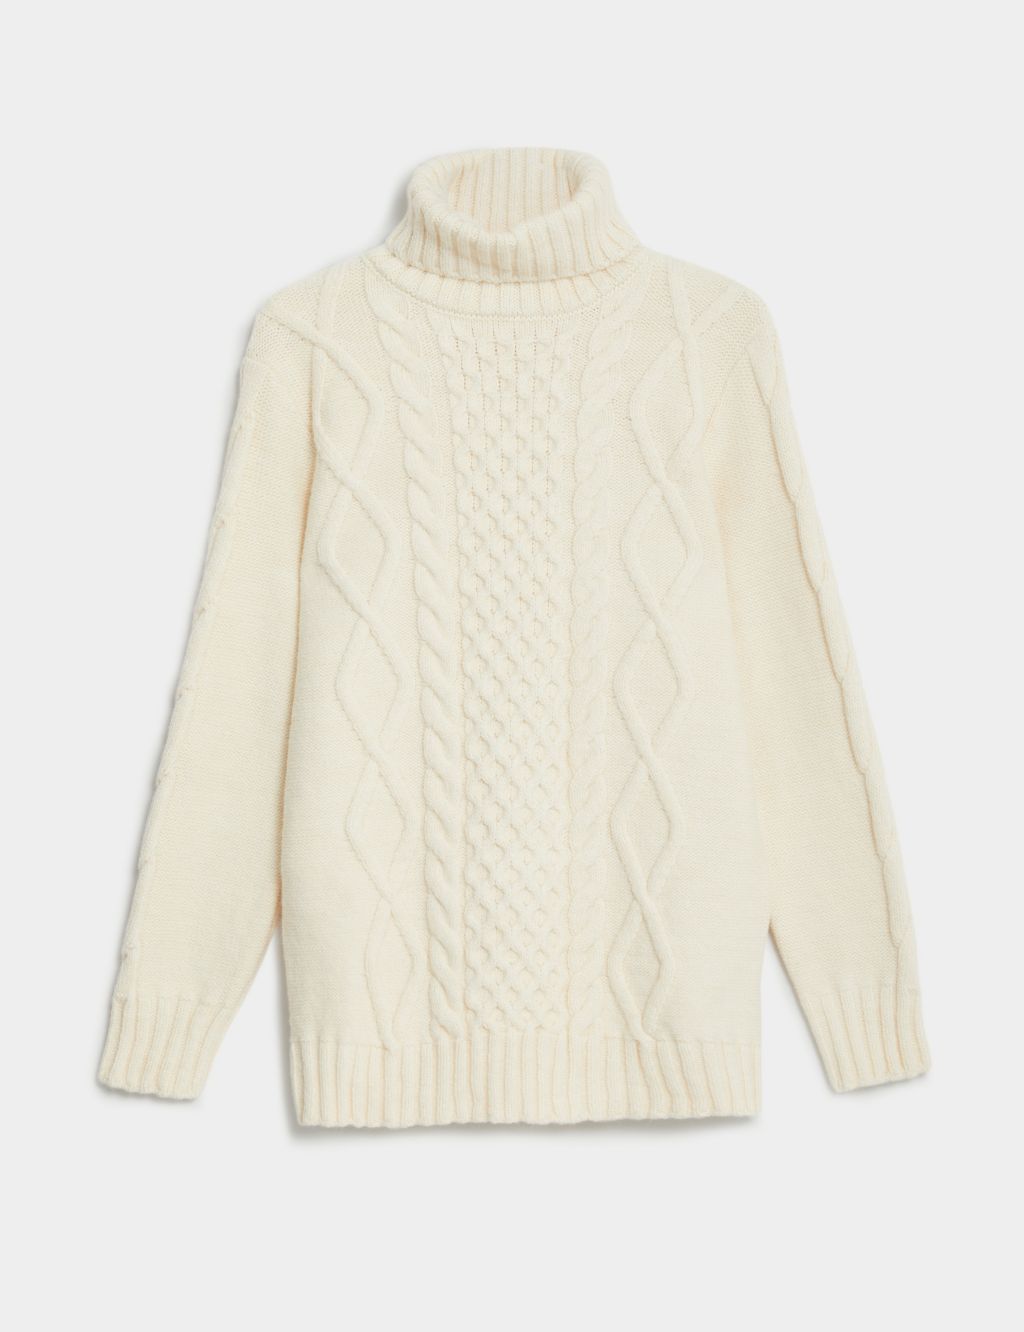 Cable Knit Roll Neck Longline Jumper image 2